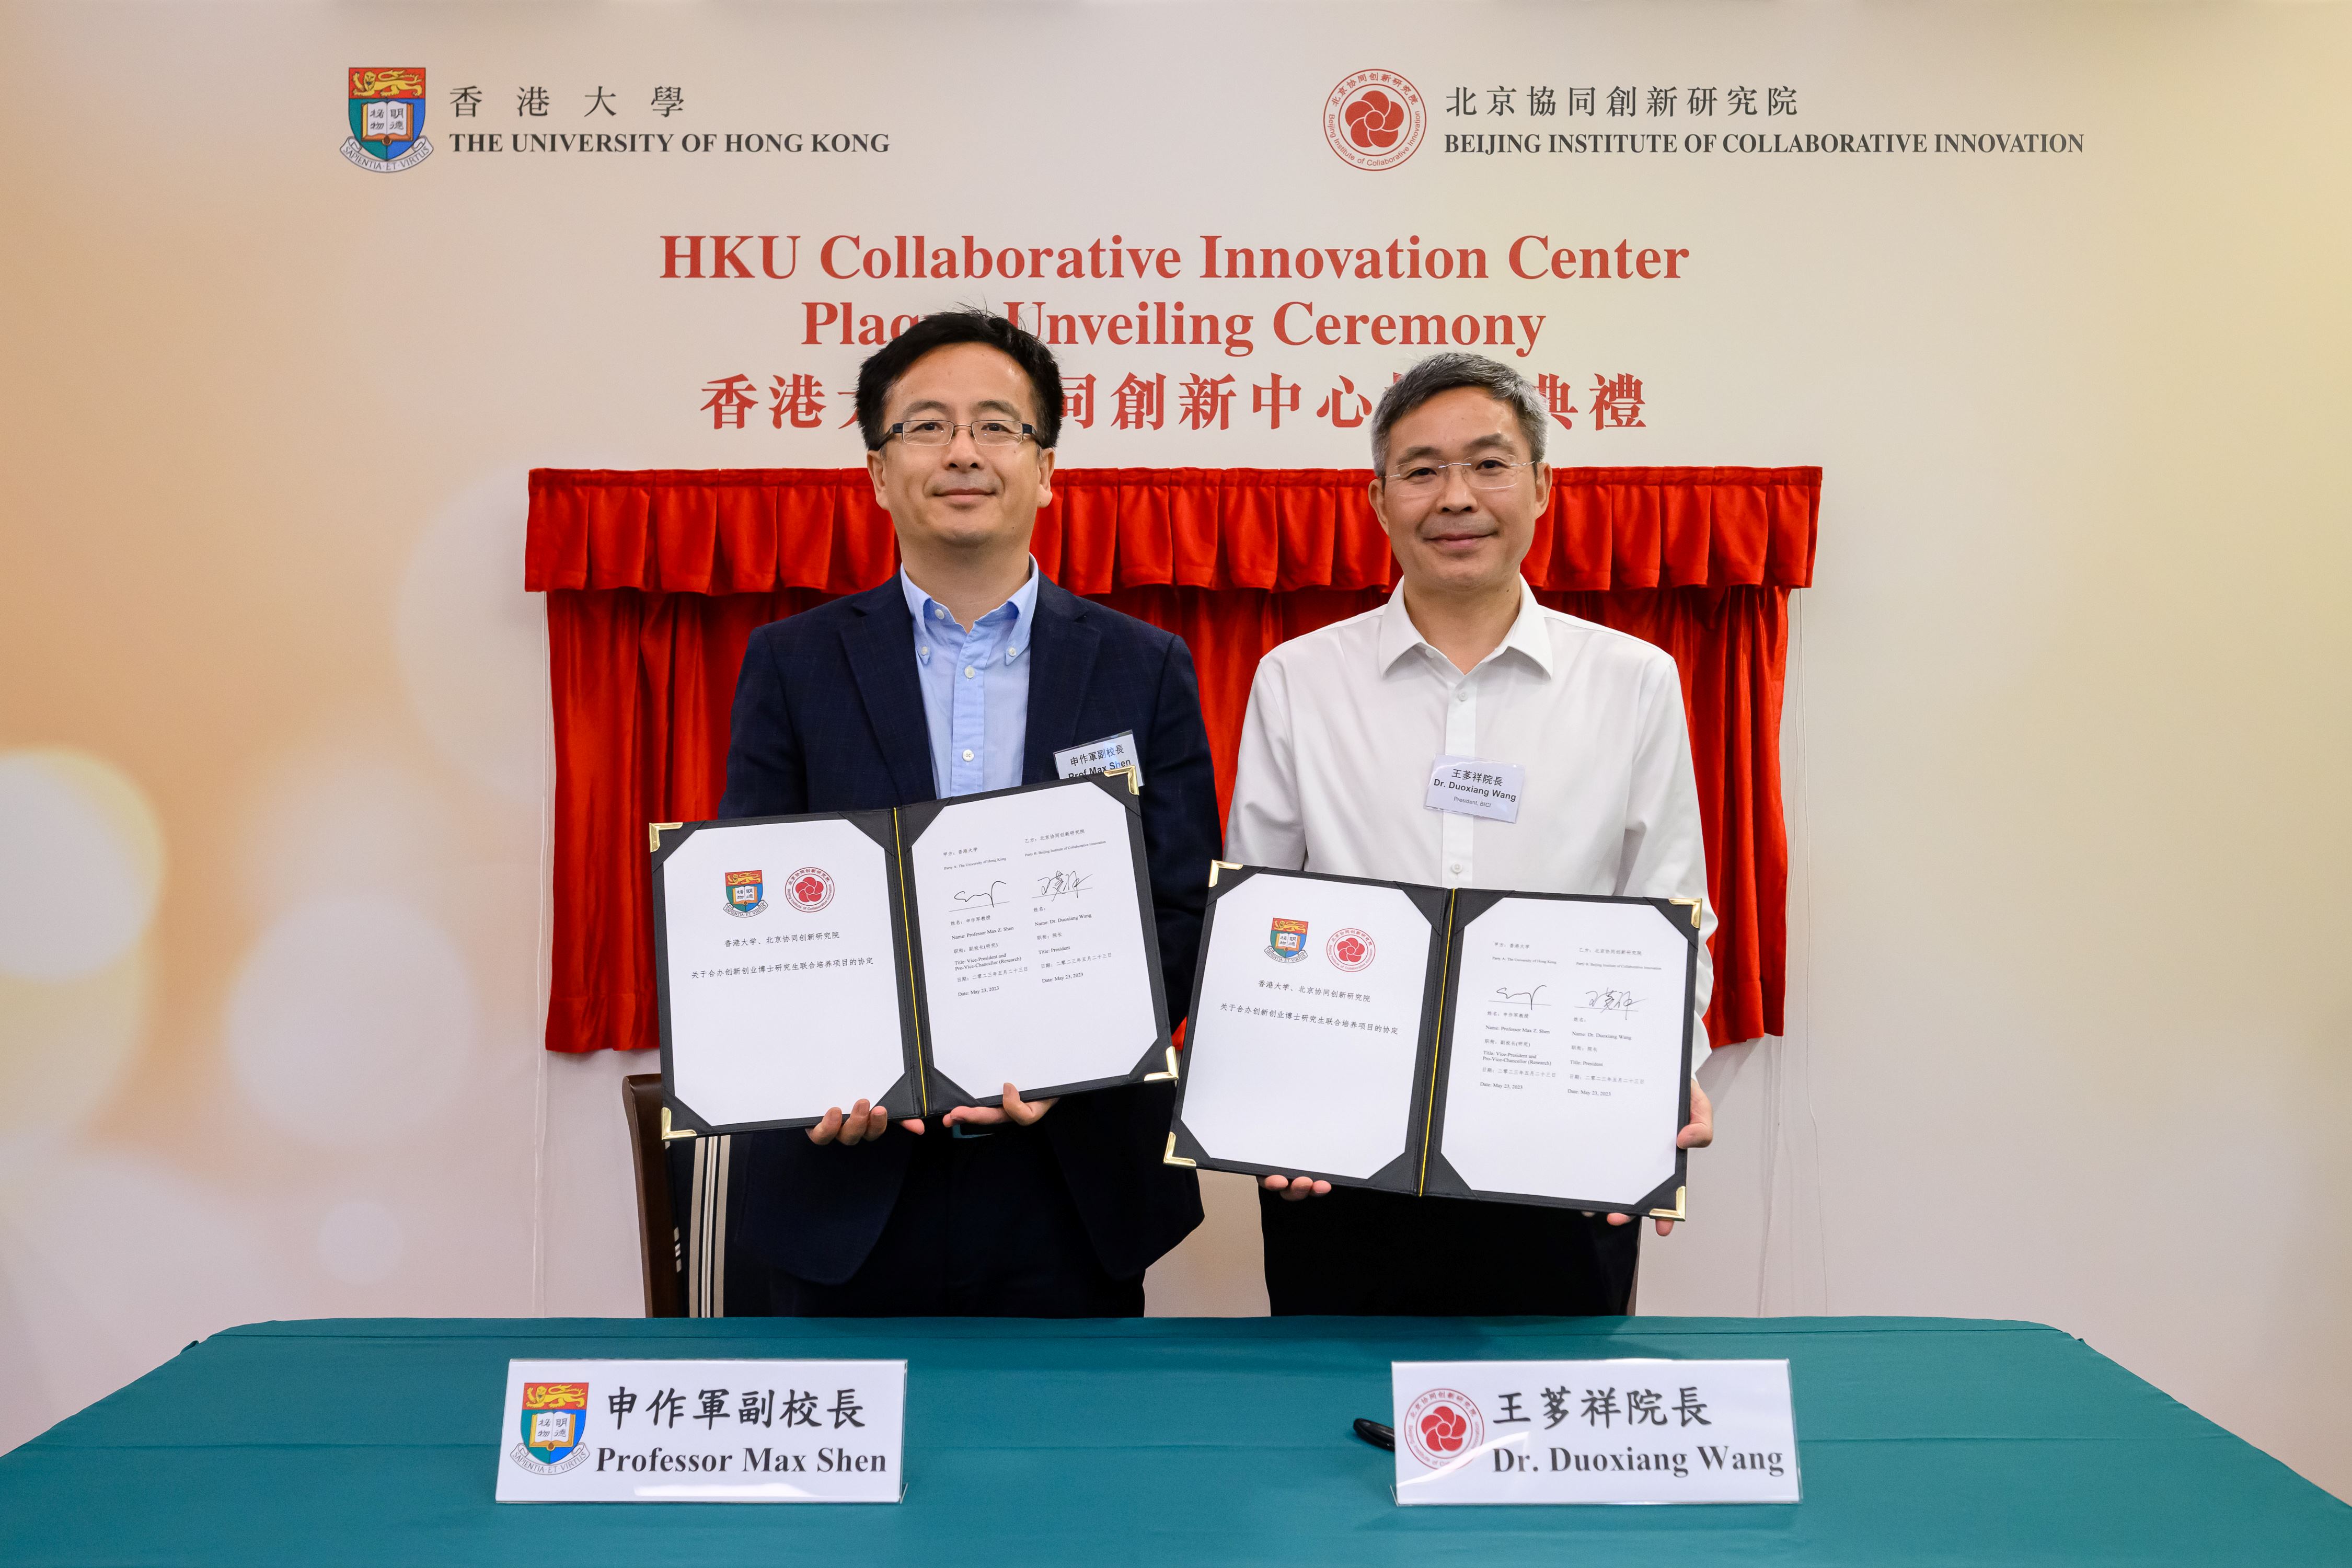 Professor Max Shen, Vice-President and Pro-Vice-Chancellor (Research) (left) and Dr Duoxiang Wang, President of BICI (right), signing the agreements on a joint training programme for PhD students between HKU and BICI.